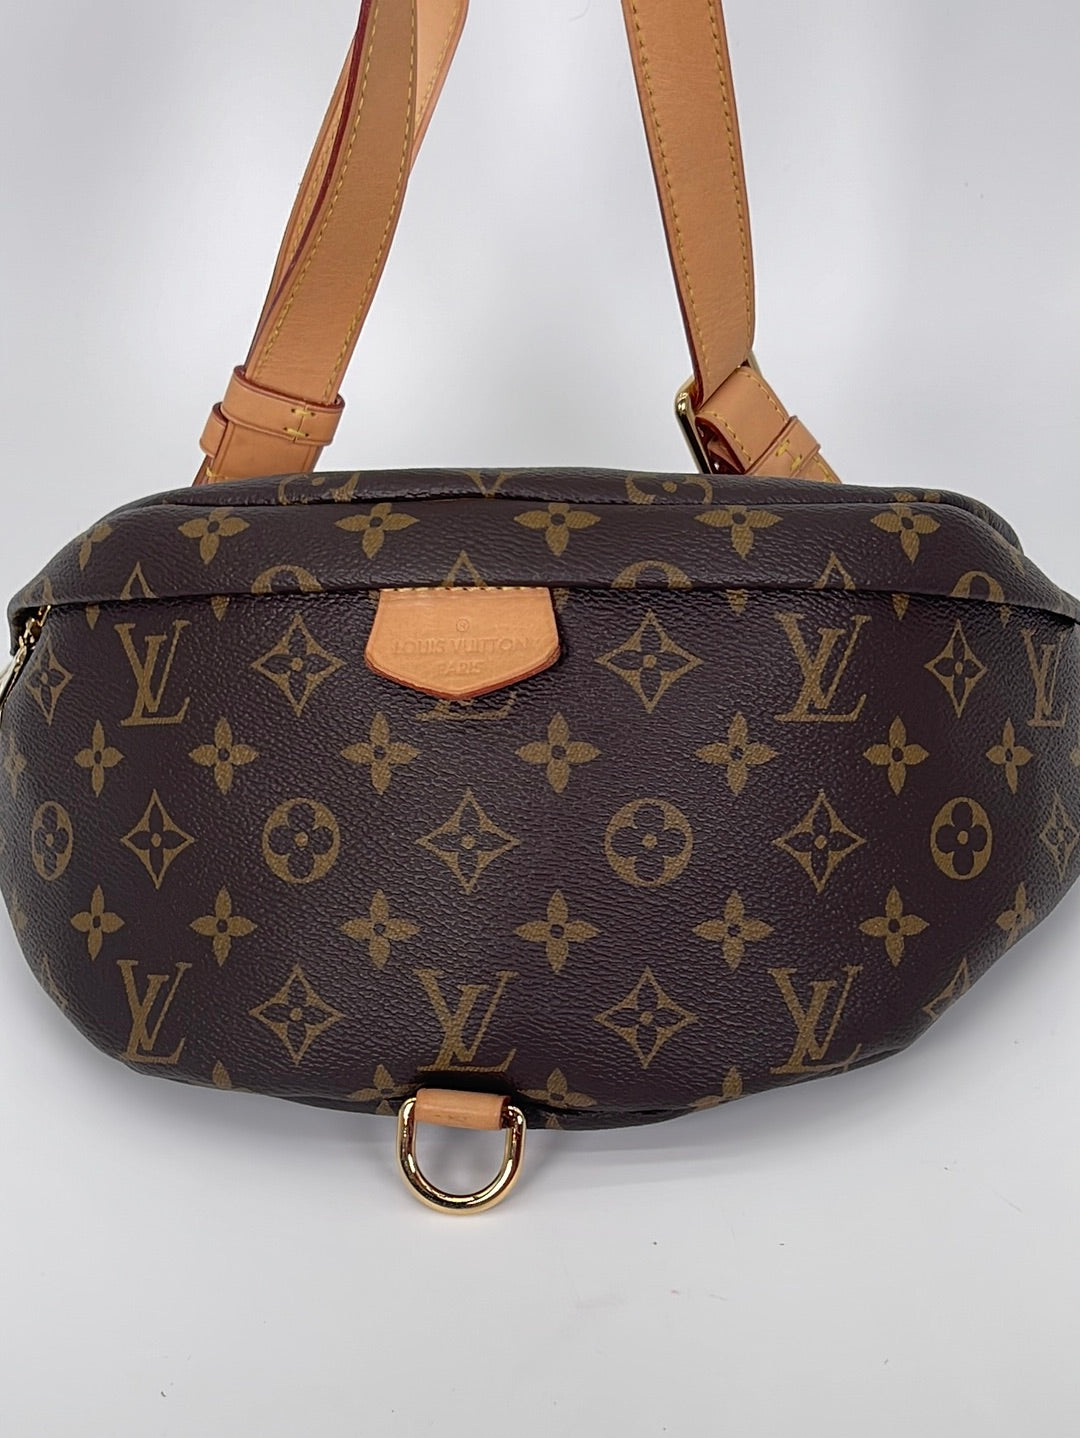 Shop Louis Vuitton Business & Briefcases (M23778) by えぷた